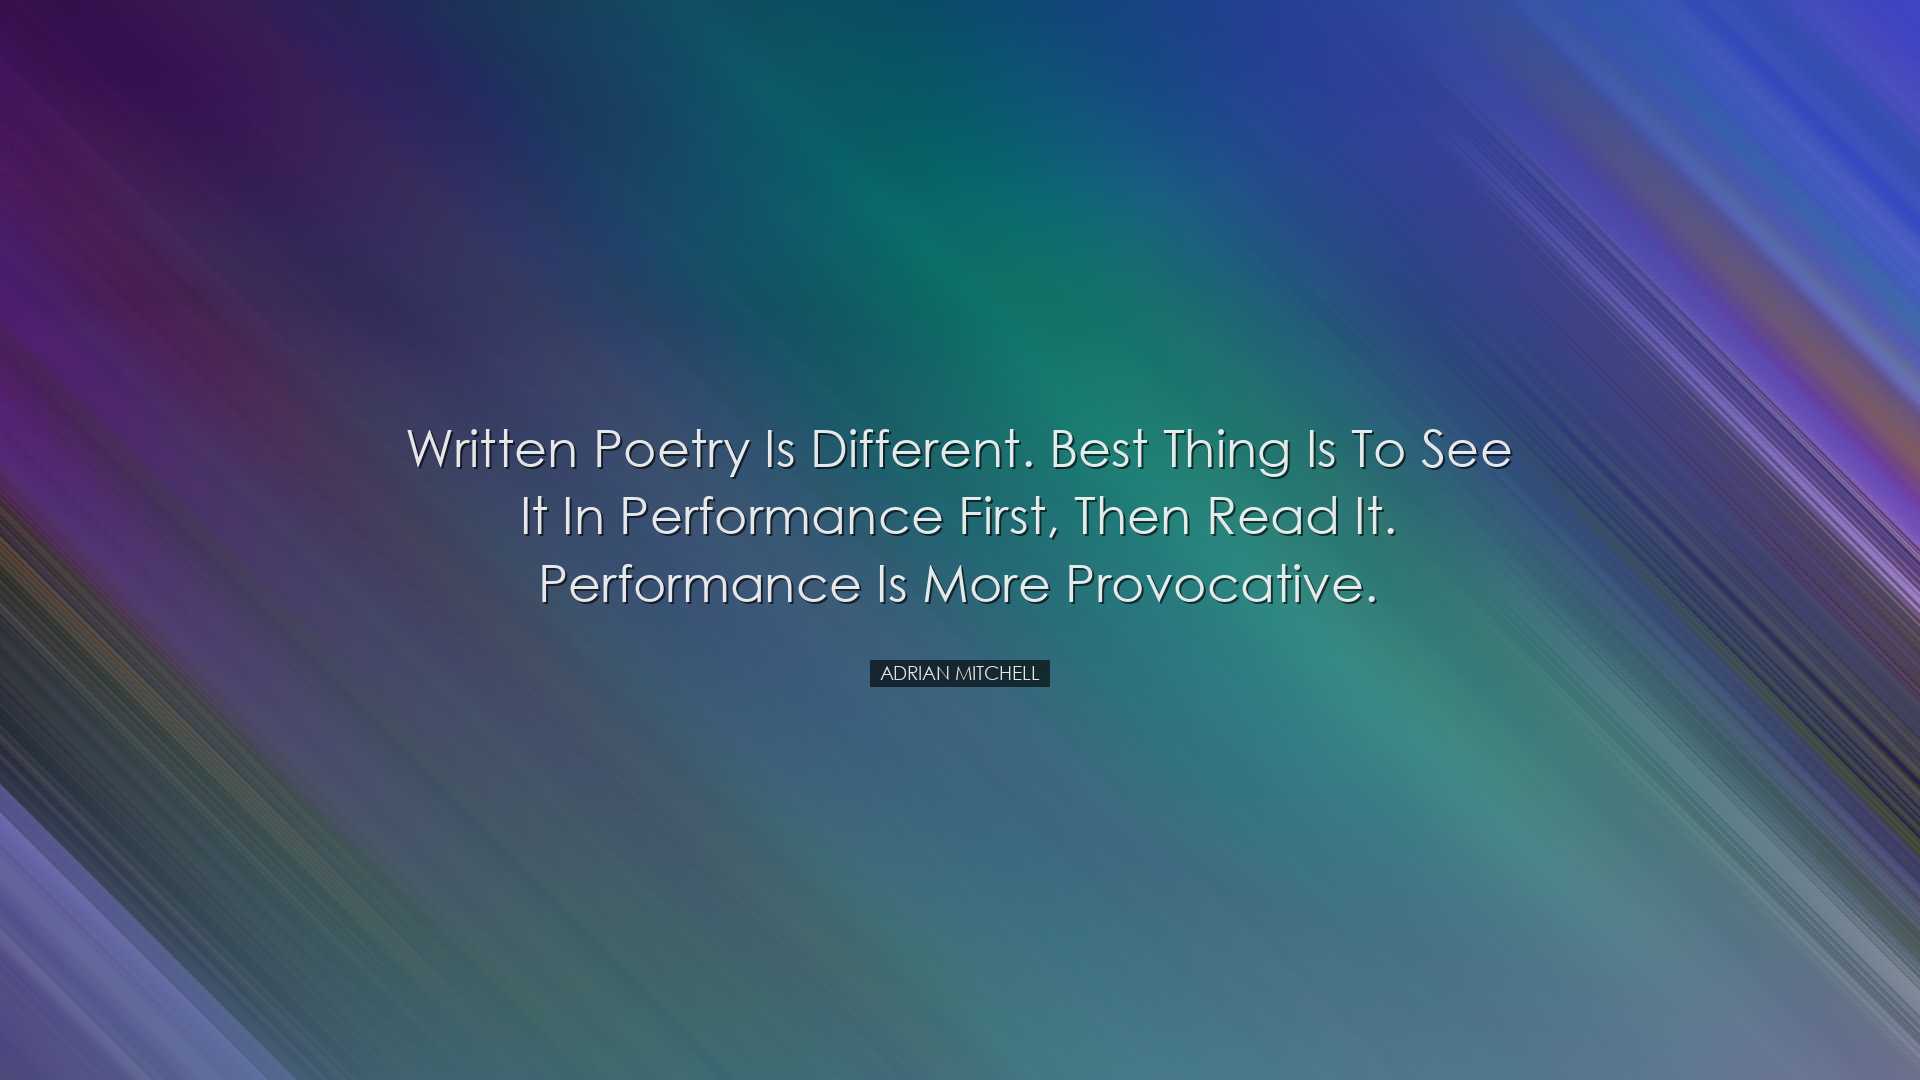 Written poetry is different. Best thing is to see it in performanc